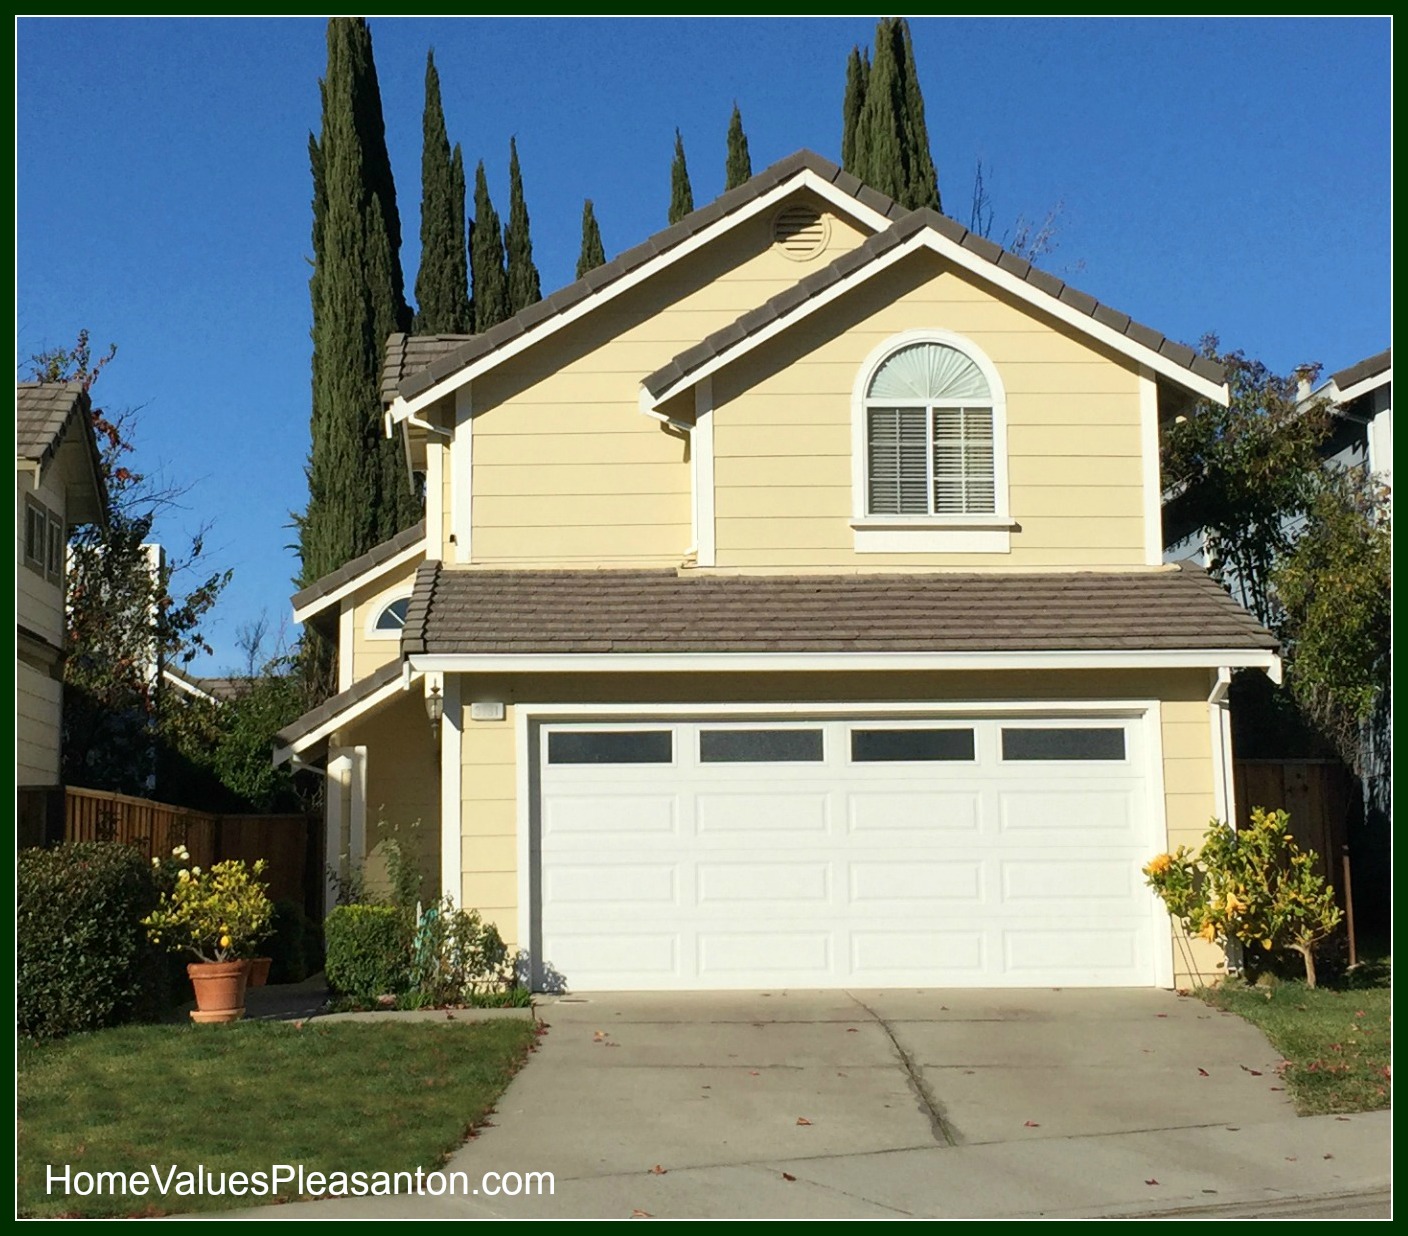 Pleasanton Ca Properties - These ideas will ensure a smoother home selling process